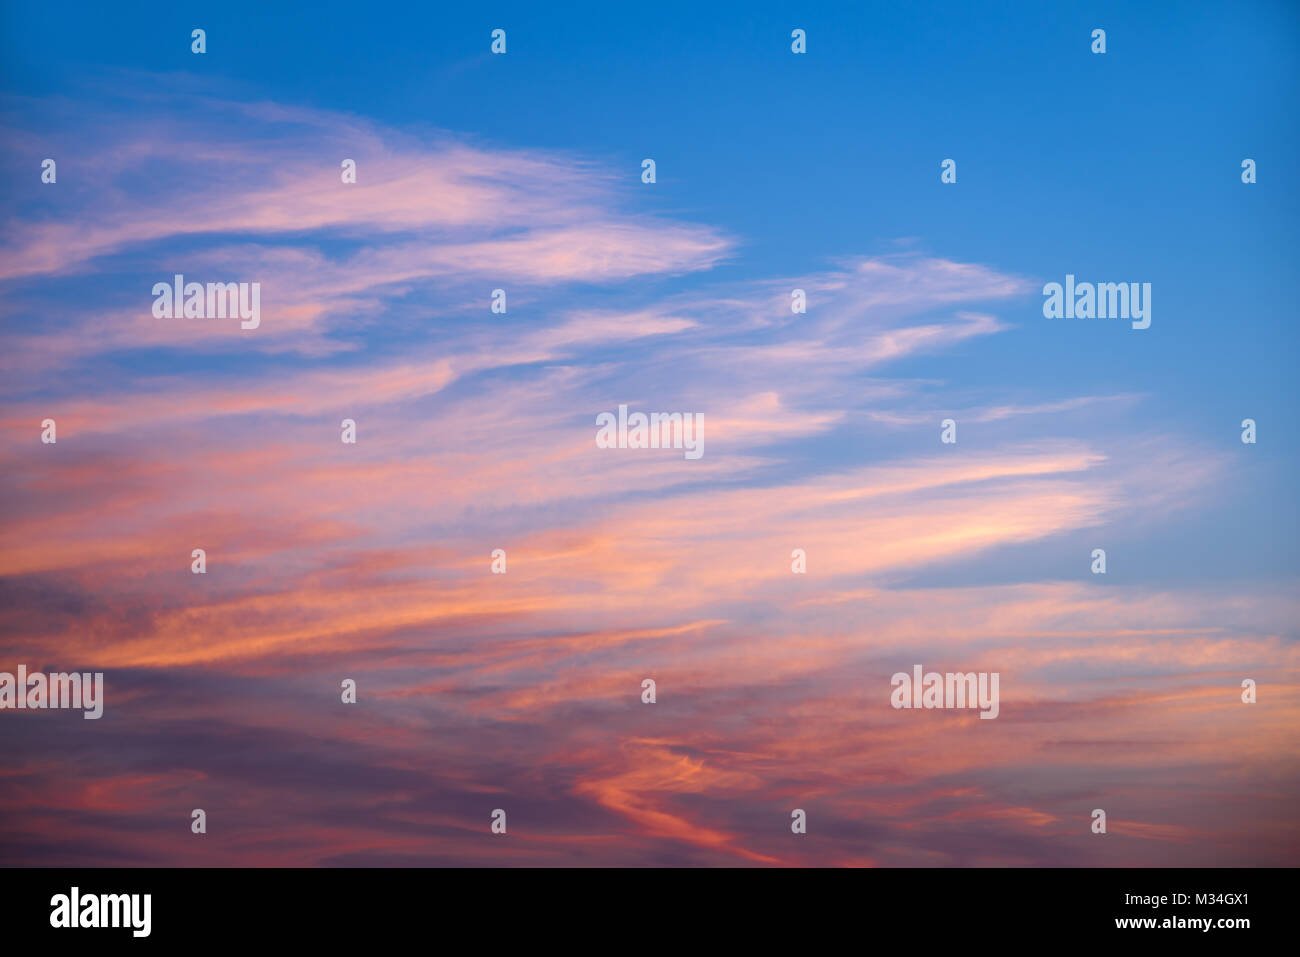 Pink and orange clouds in a blue sky at sunset Stock Photo